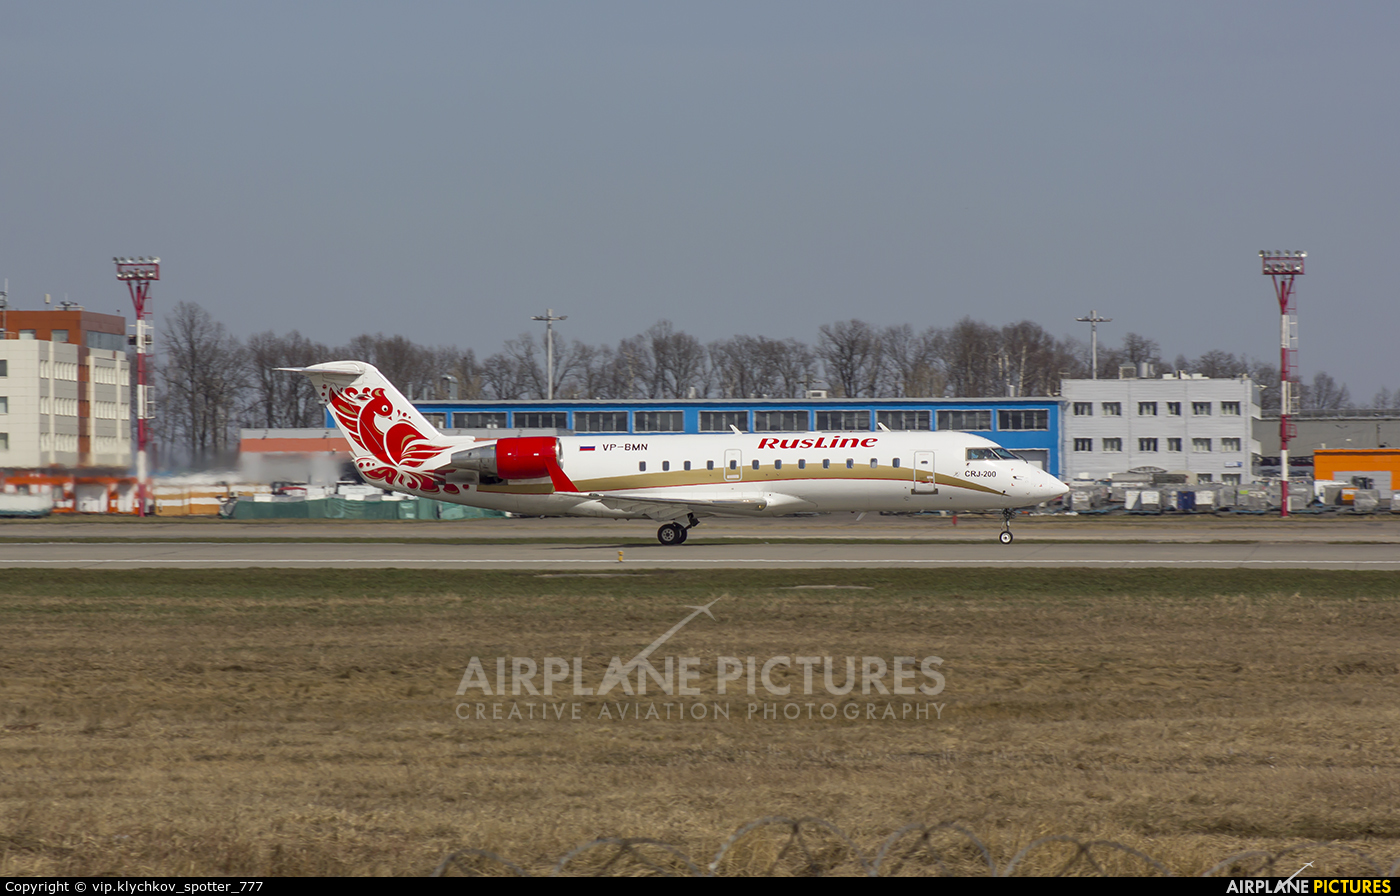 Rusline VP-BMN aircraft at Moscow - Domodedovo